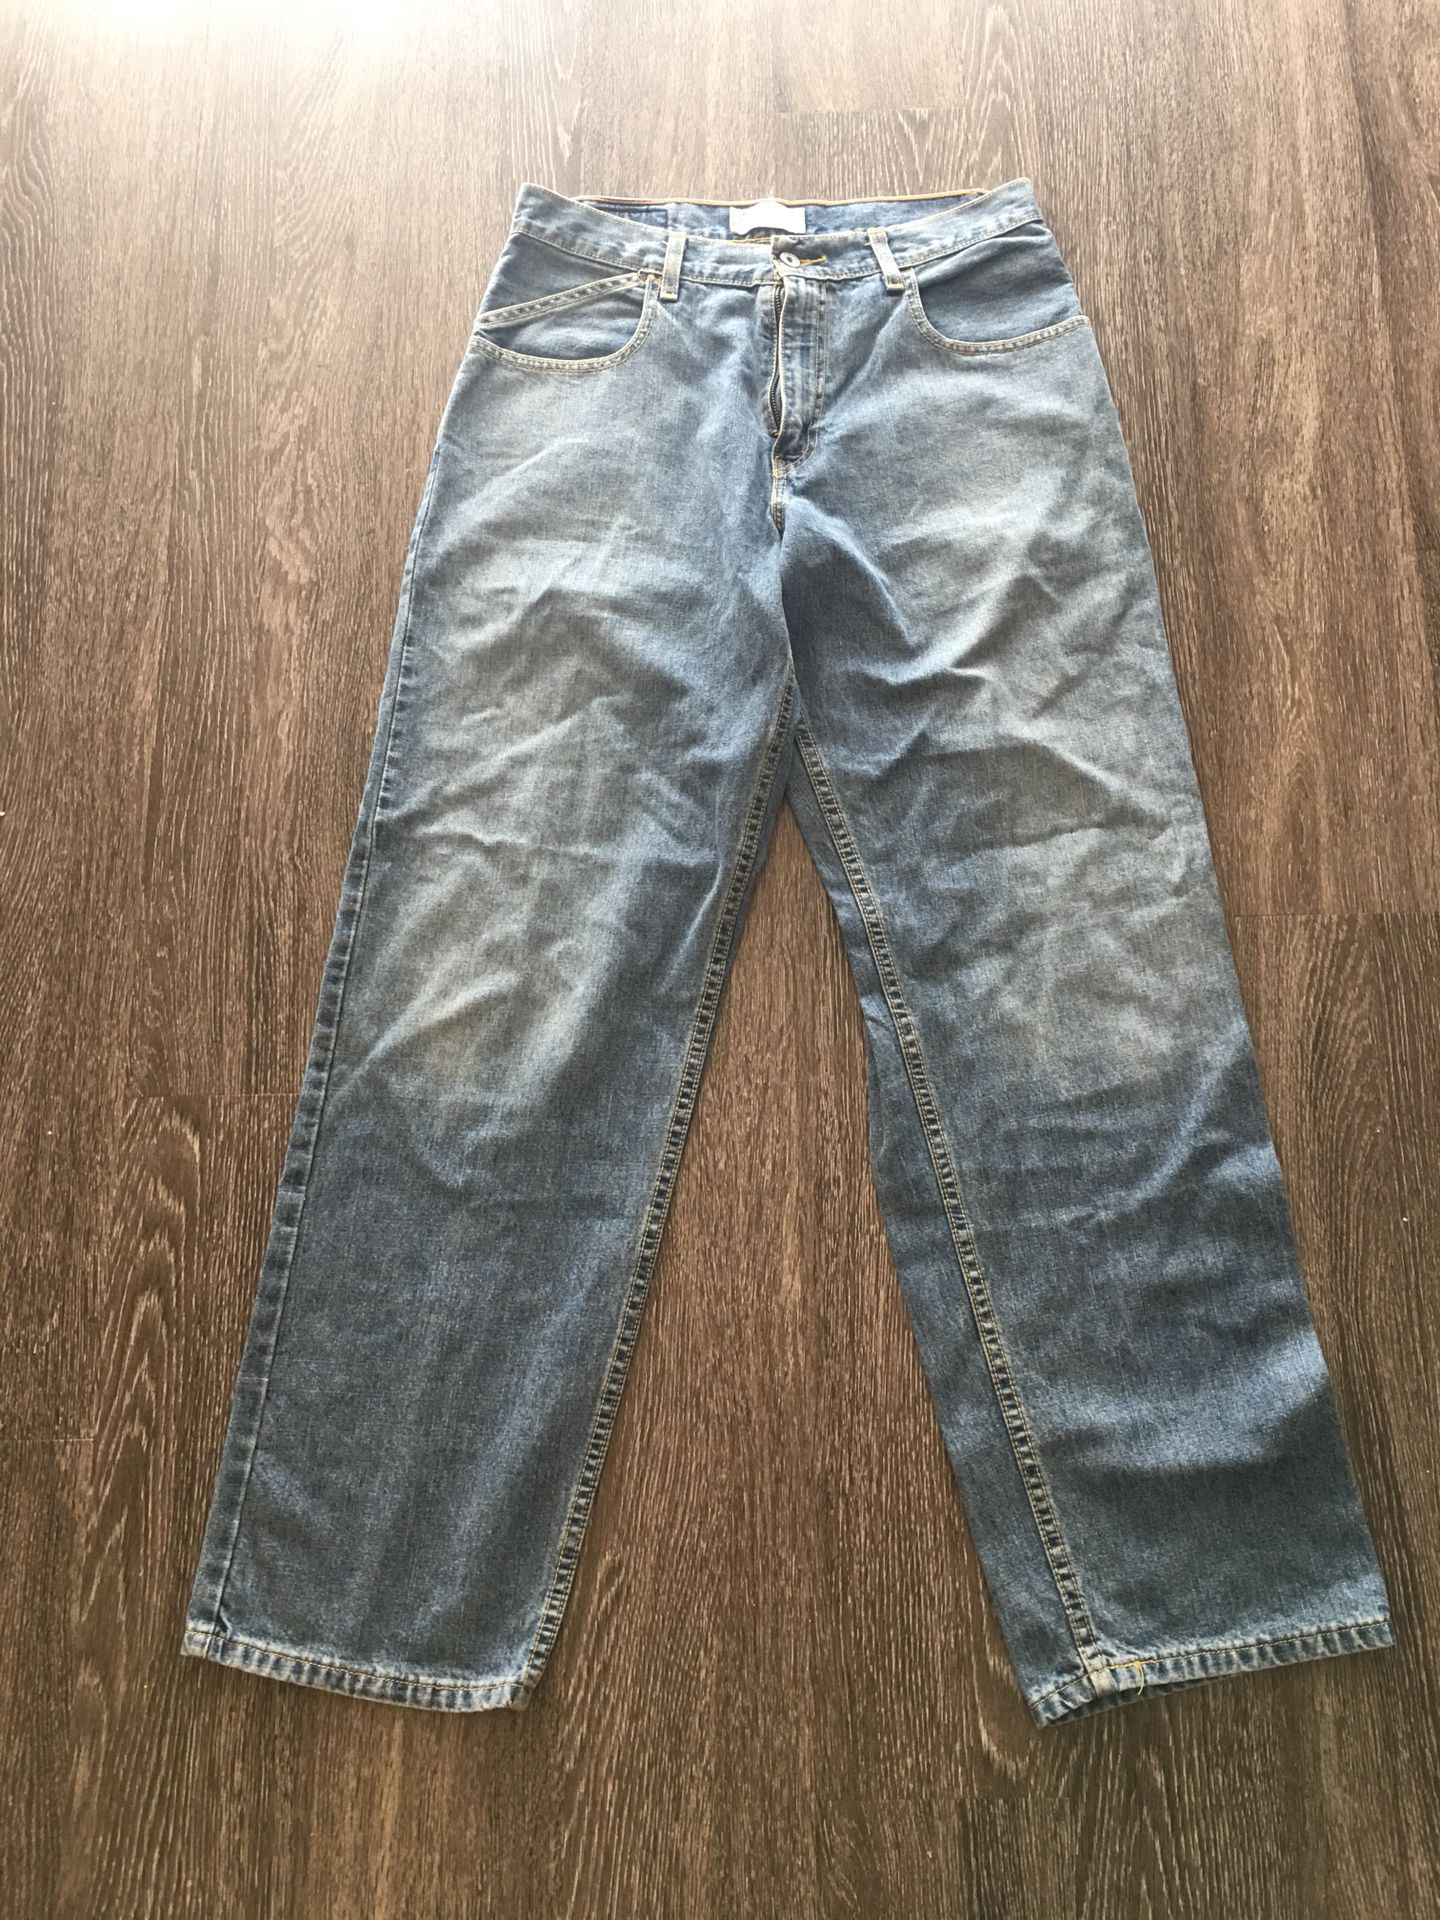 Levi’s Silvertab baggy fit jeans. 32X32